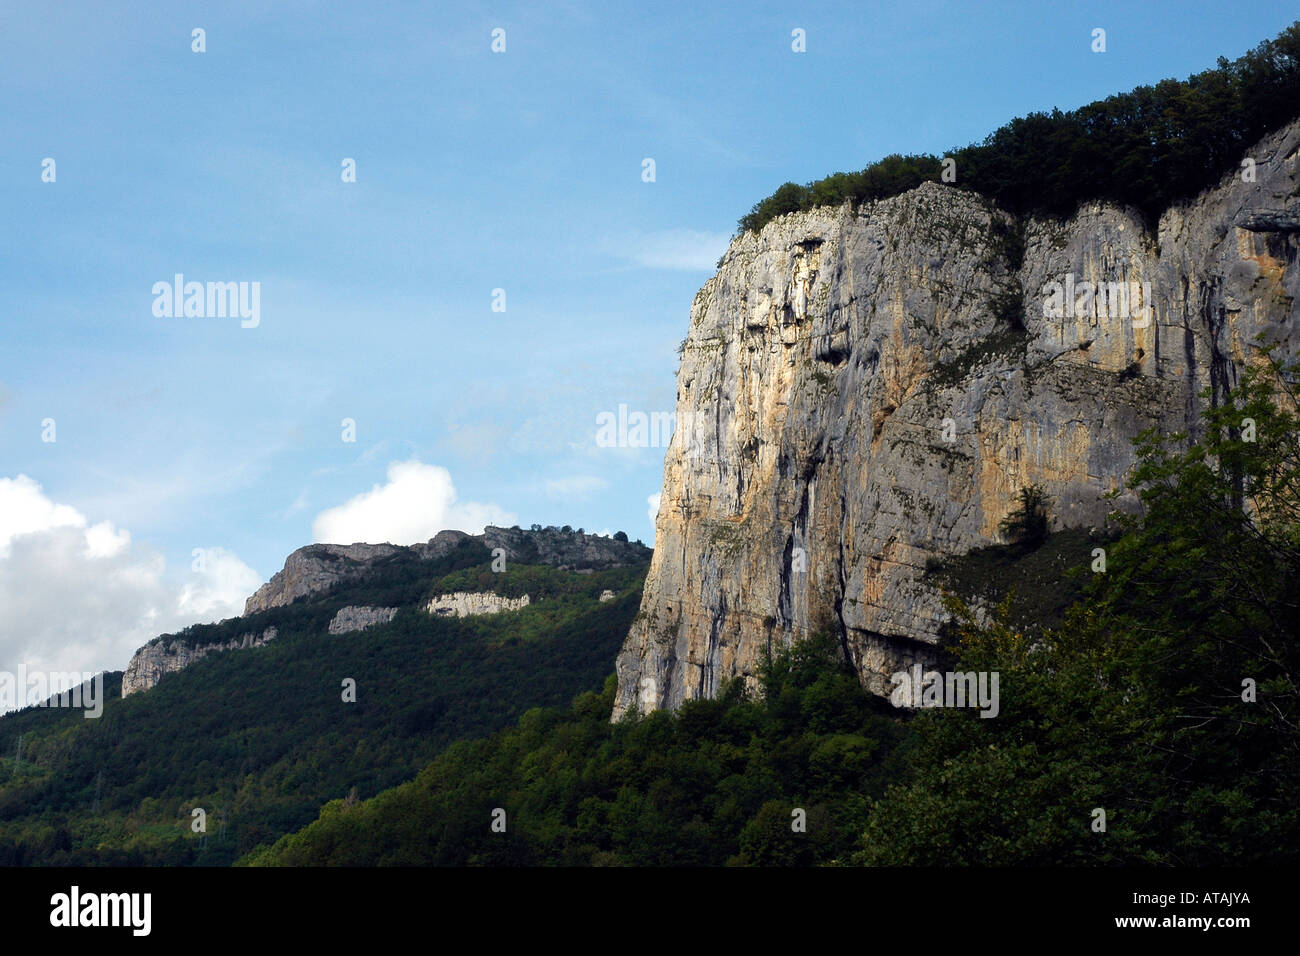 In France's Jura massif limestone cliffs are a common geological feature, this one above the Loue river valley Stock Photo